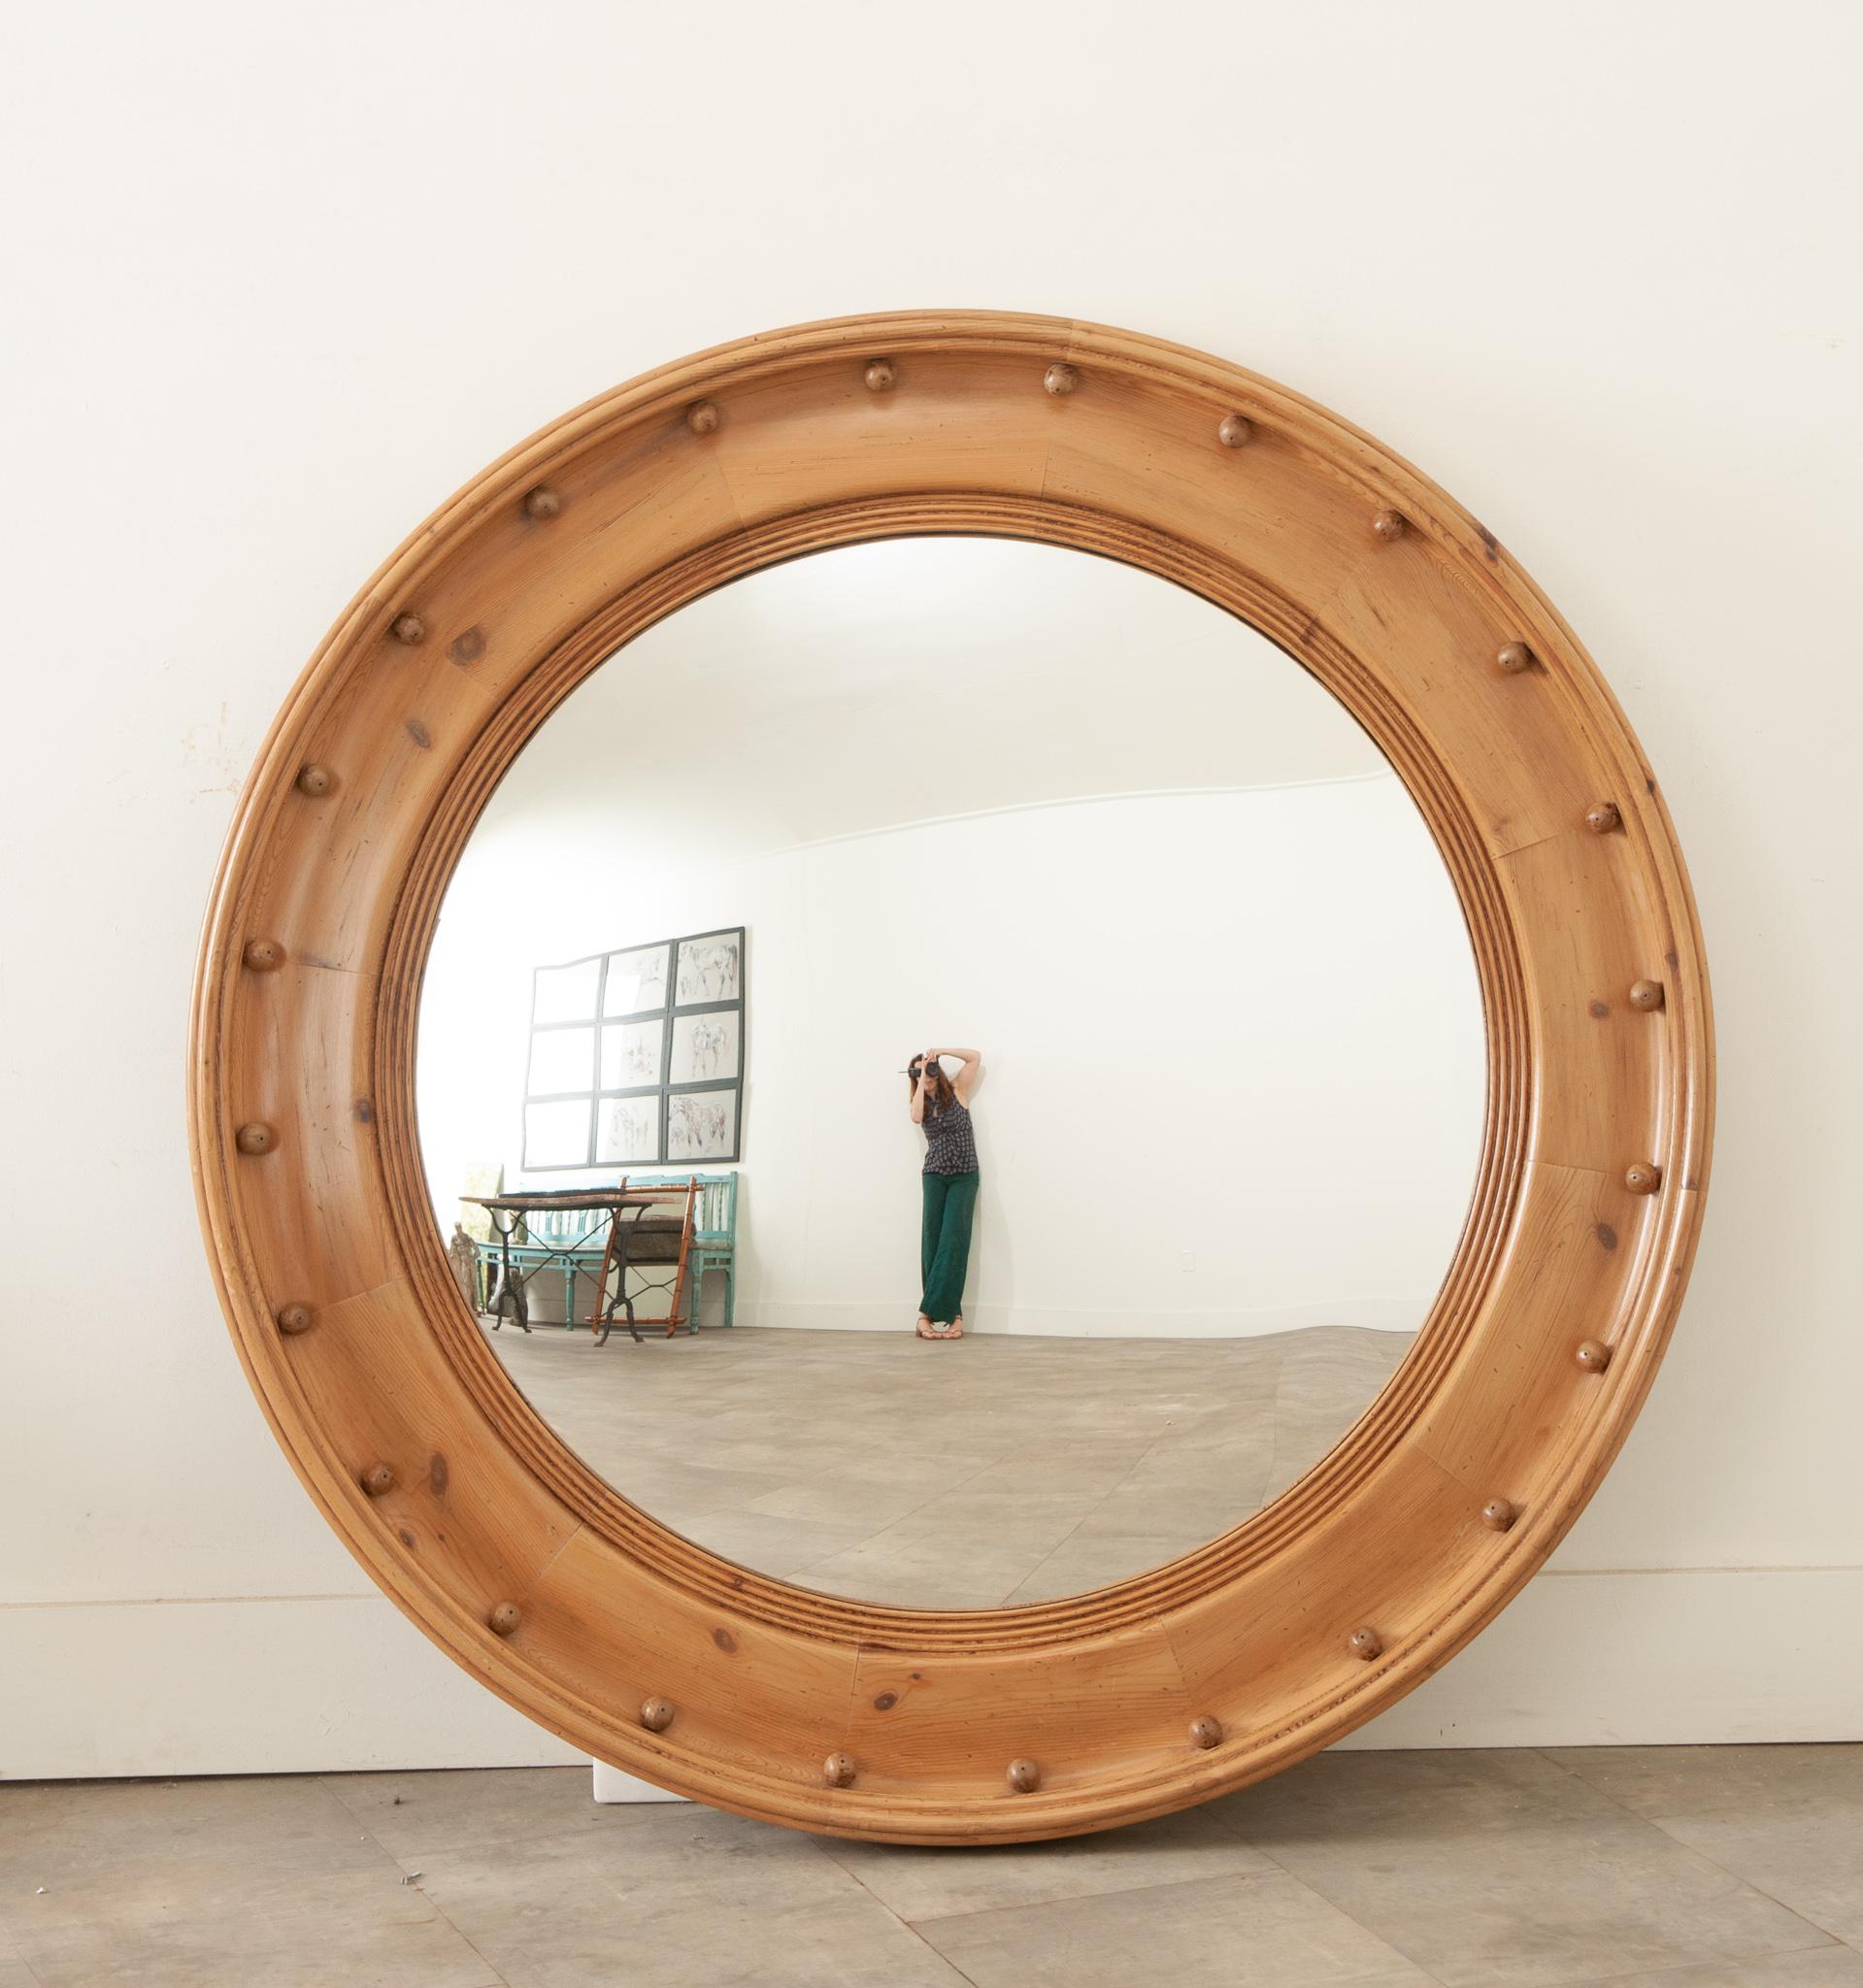 A massive English pine convex bullseye mirror with petite spheres and natural finish. Created in England during the 19th century, this stylish circular mirror features a central convex mirror plate reflecting and distorting images beautifully,